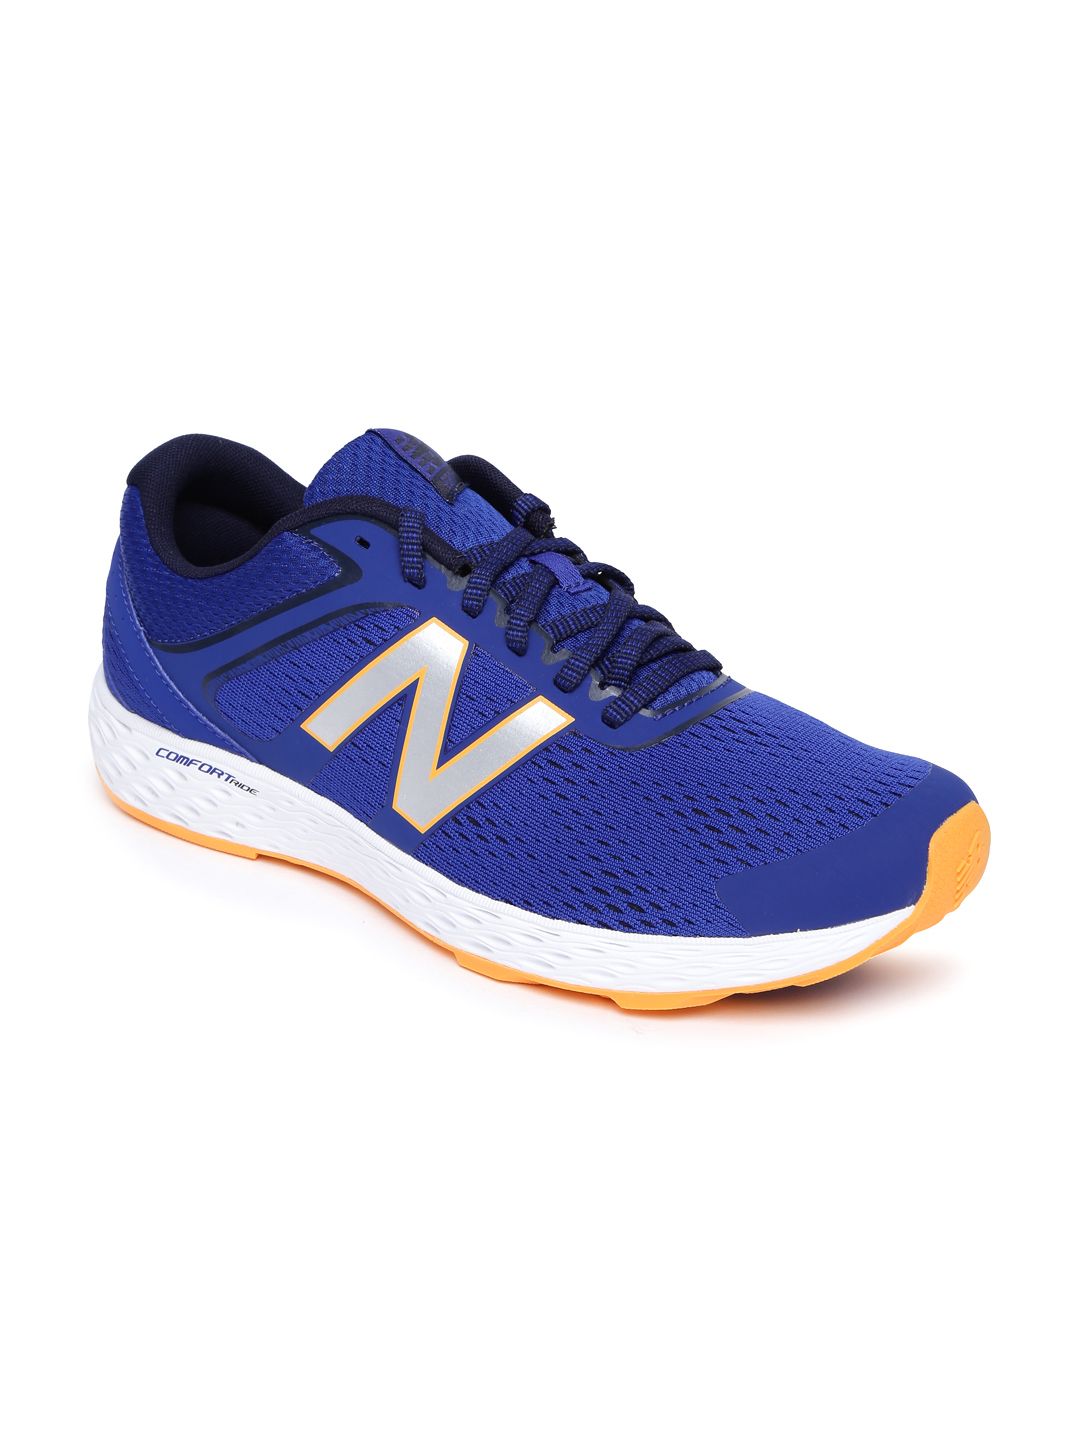 New Balance 520 Blue Running Shoes for Men online in India at Best ...